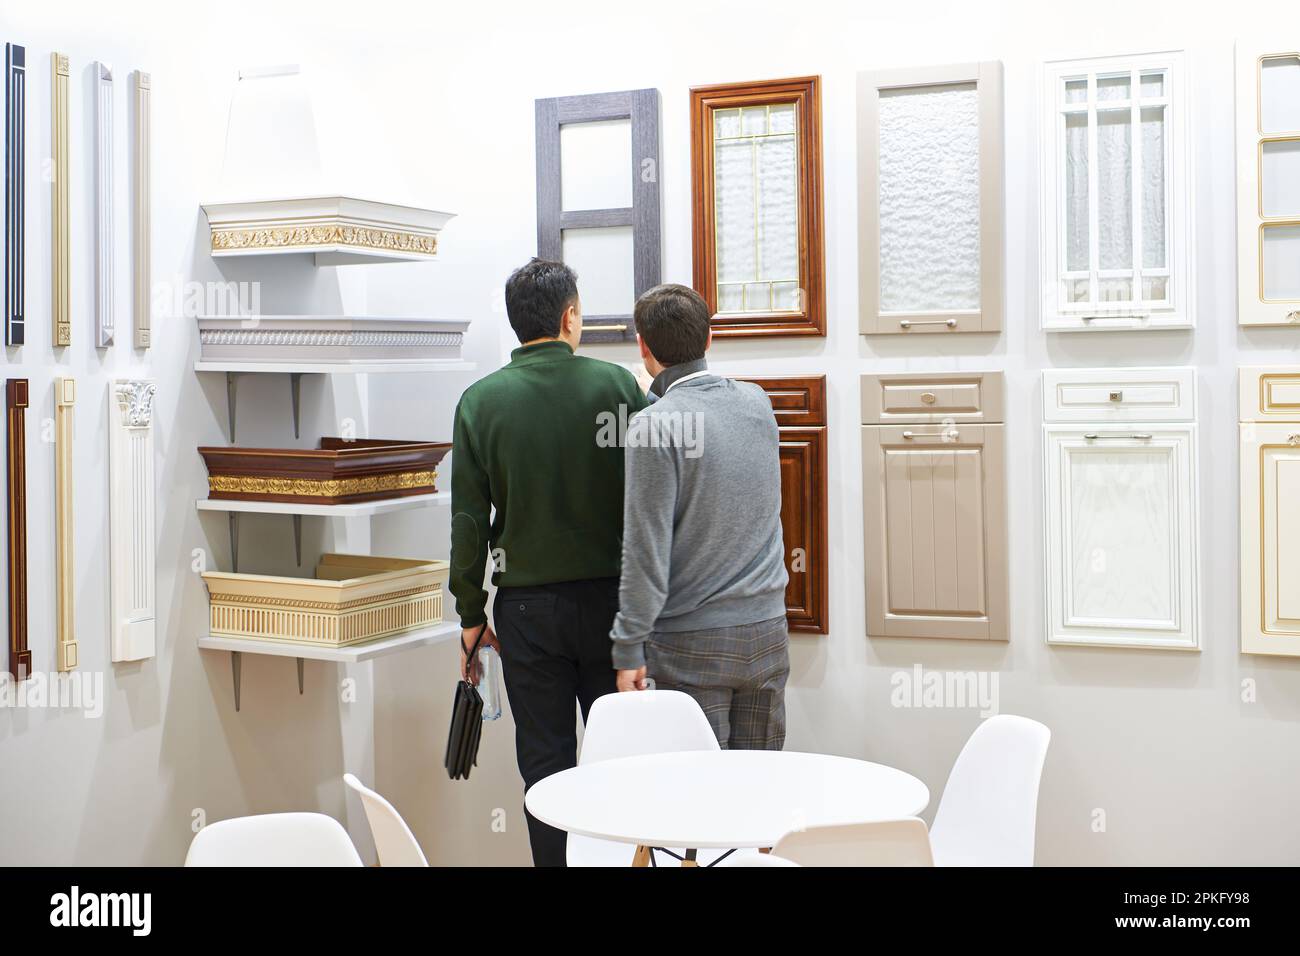 Buyers in a furniture store Stock Photo